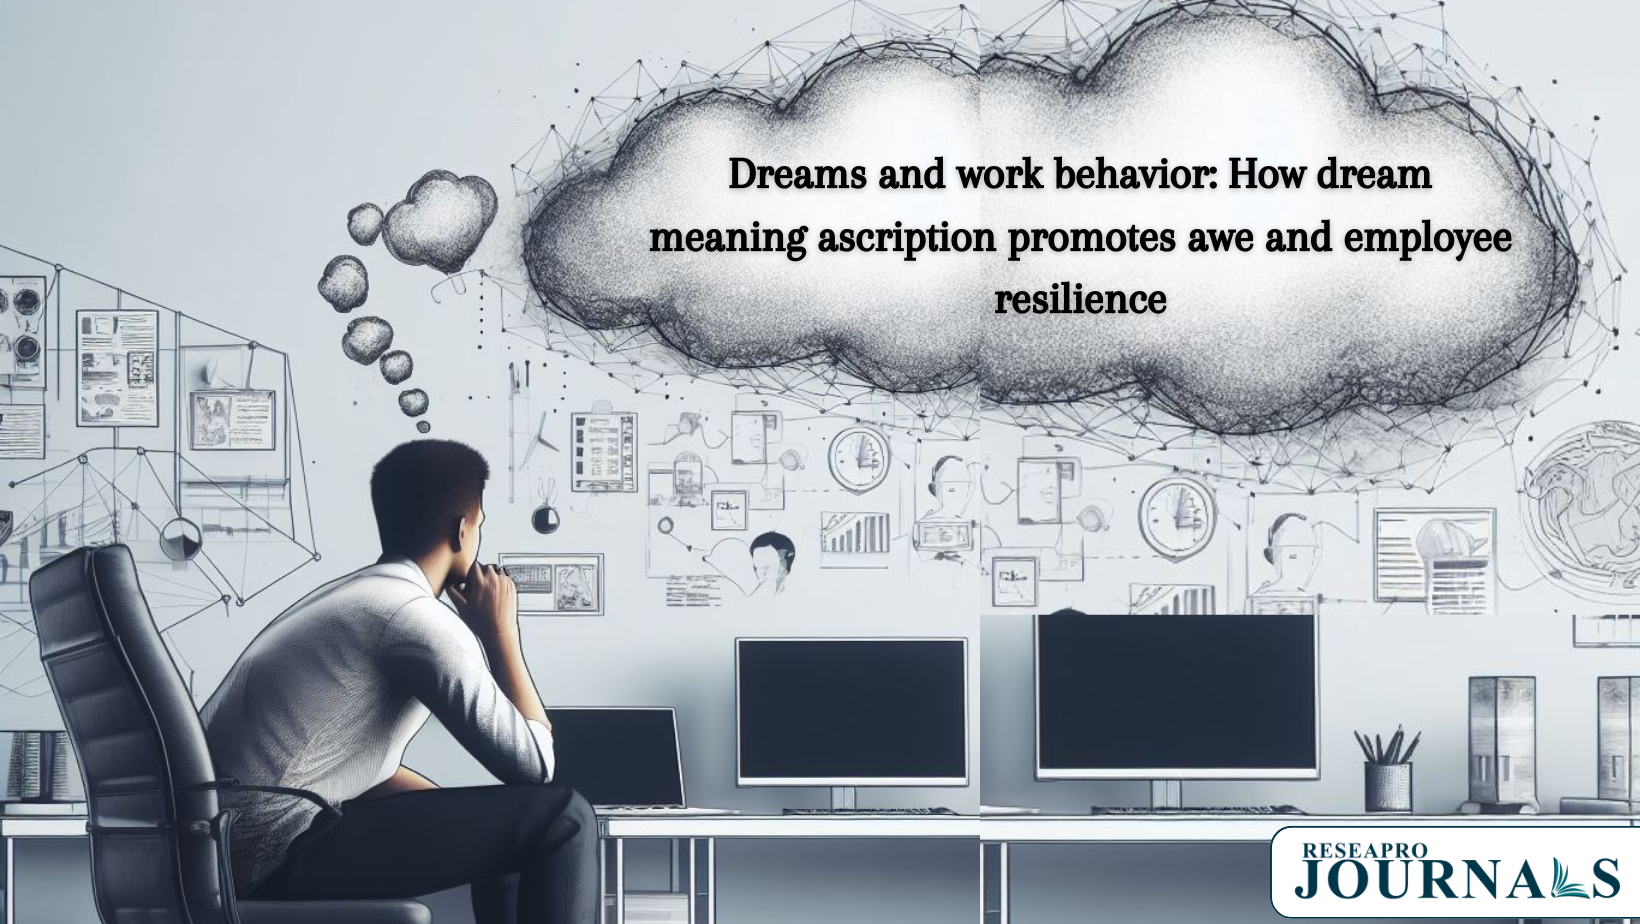 A Spillover model of dreams and work behavior